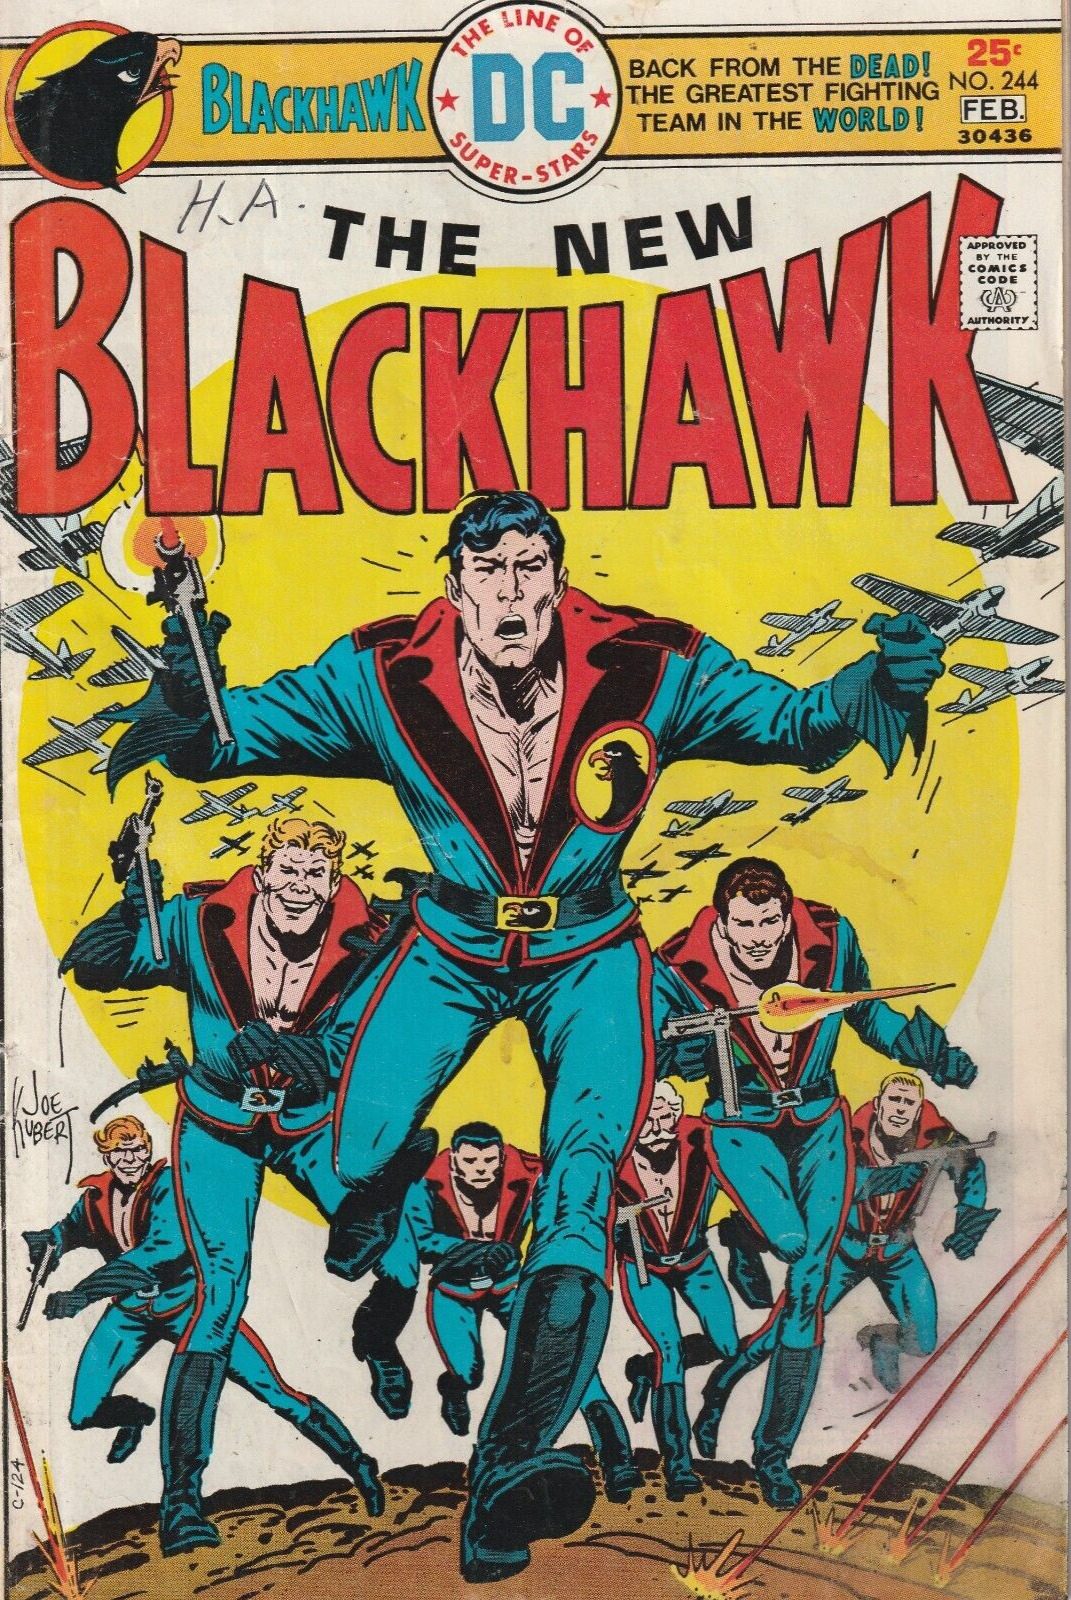 BLACKHAWK #244  FIRST RE-LAUNCH ISSUE  DC  1975